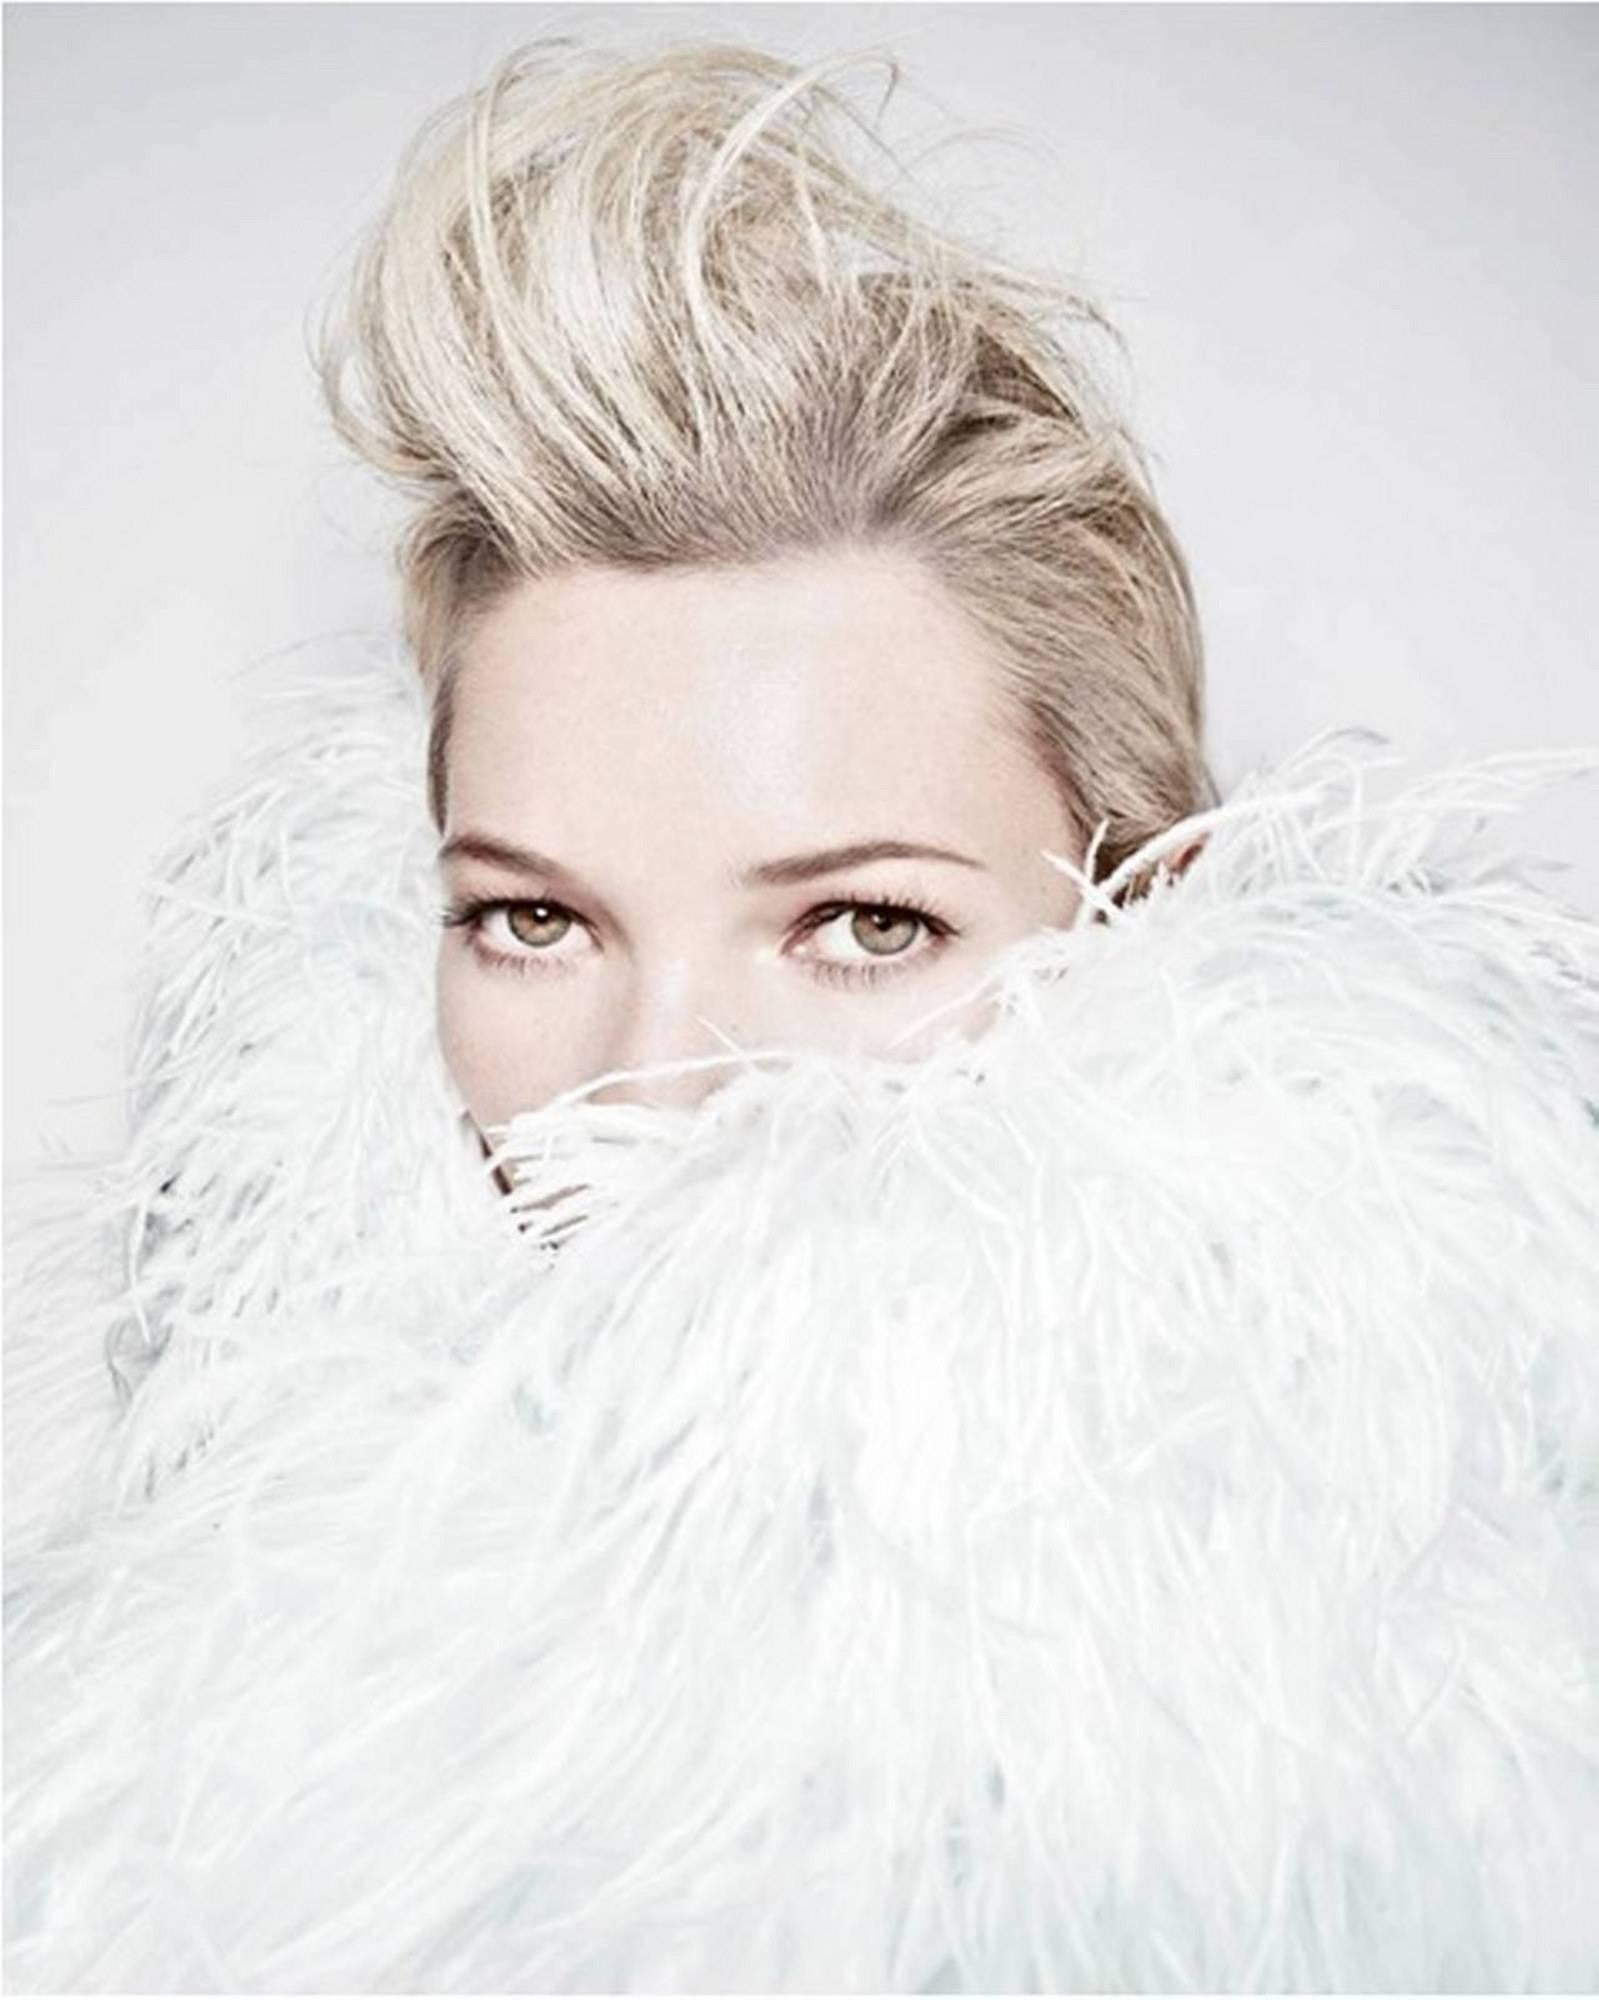 Rankin Color Photograph - Kate Furry Quiff (Kate Moss)